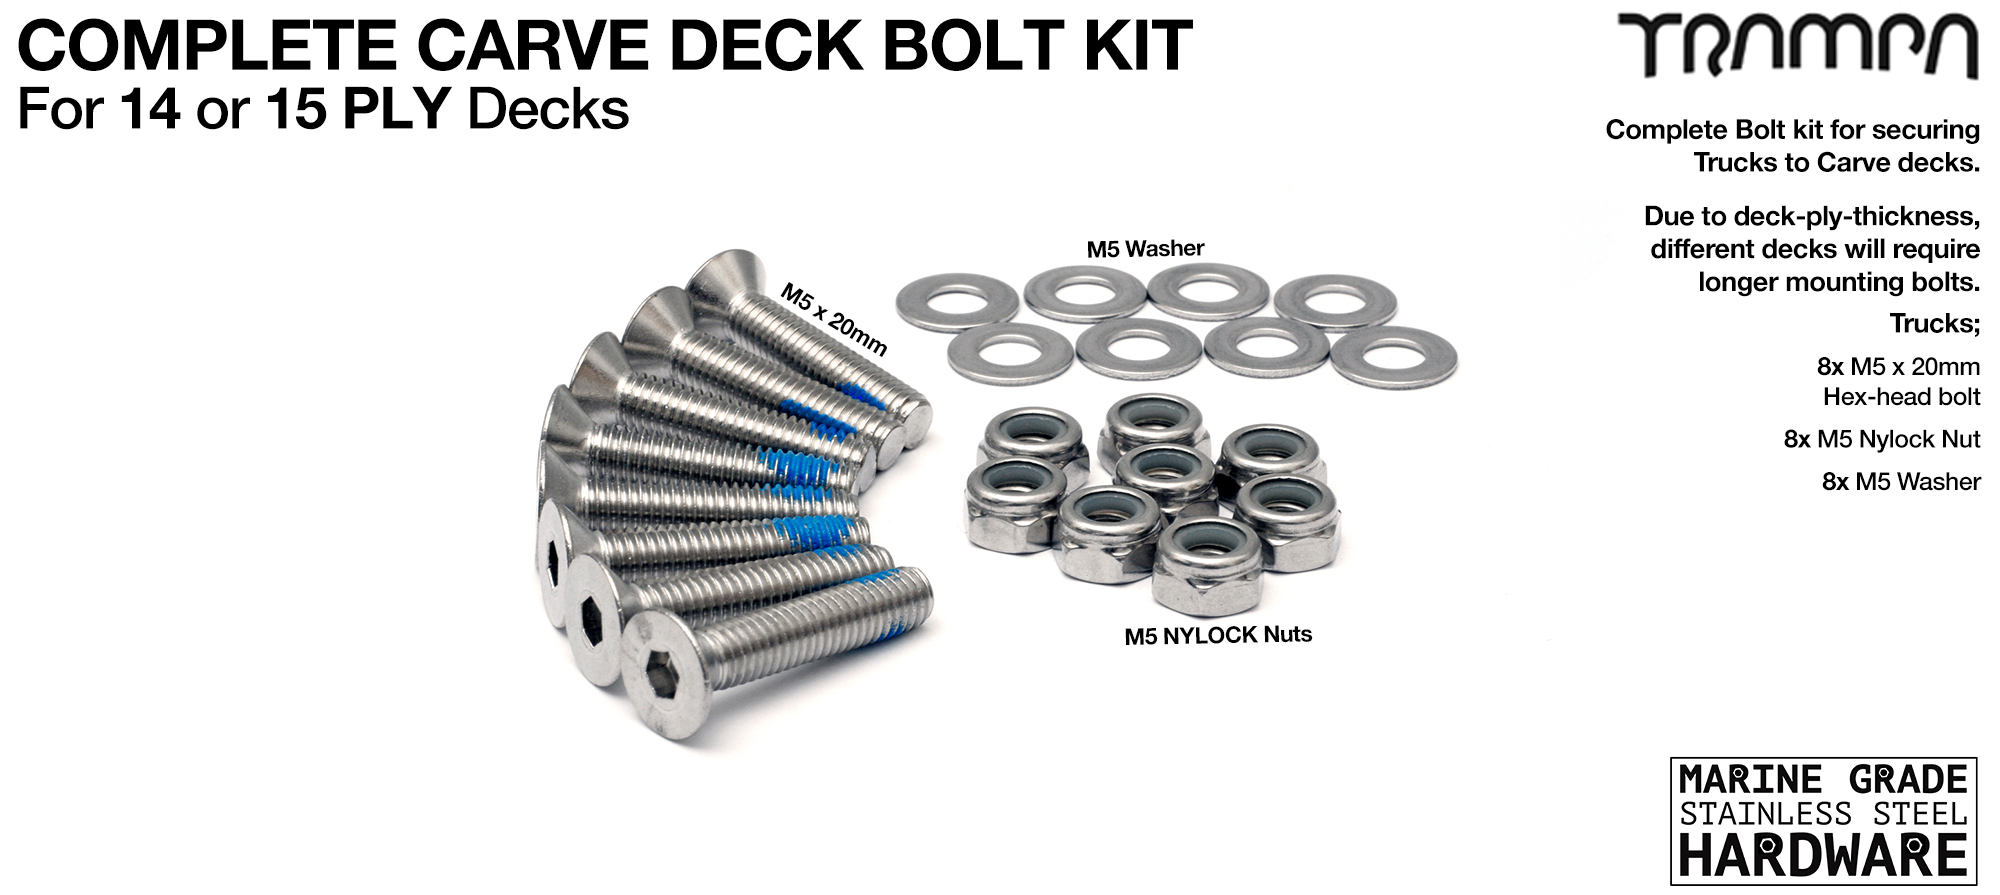 20mm Marine grade Stainless Steel Countersunk Bolt Kit - fixes Mini Spring Trucks to 14/15ply Carve Decks